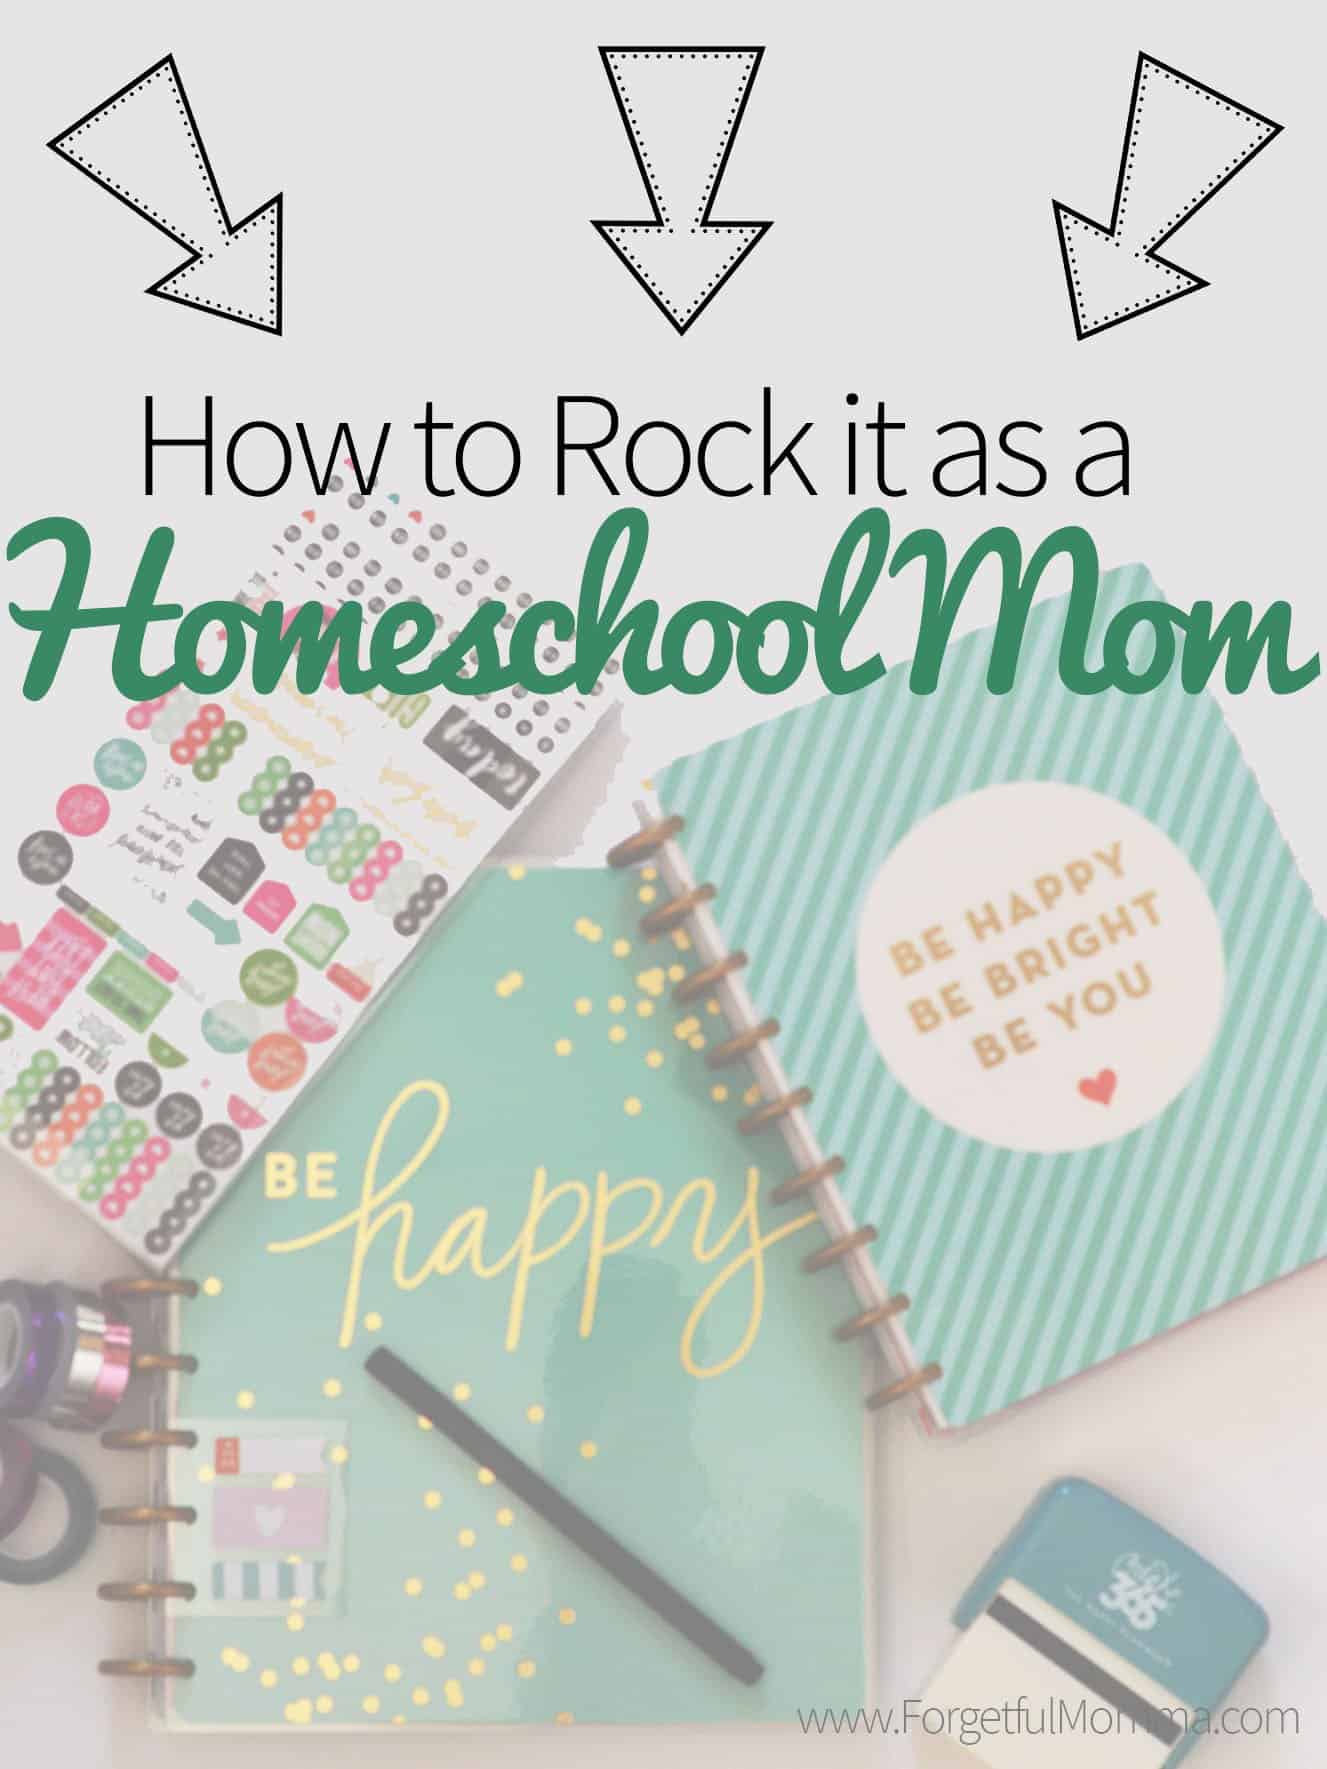 How to Rock it as A Homeschool Mom